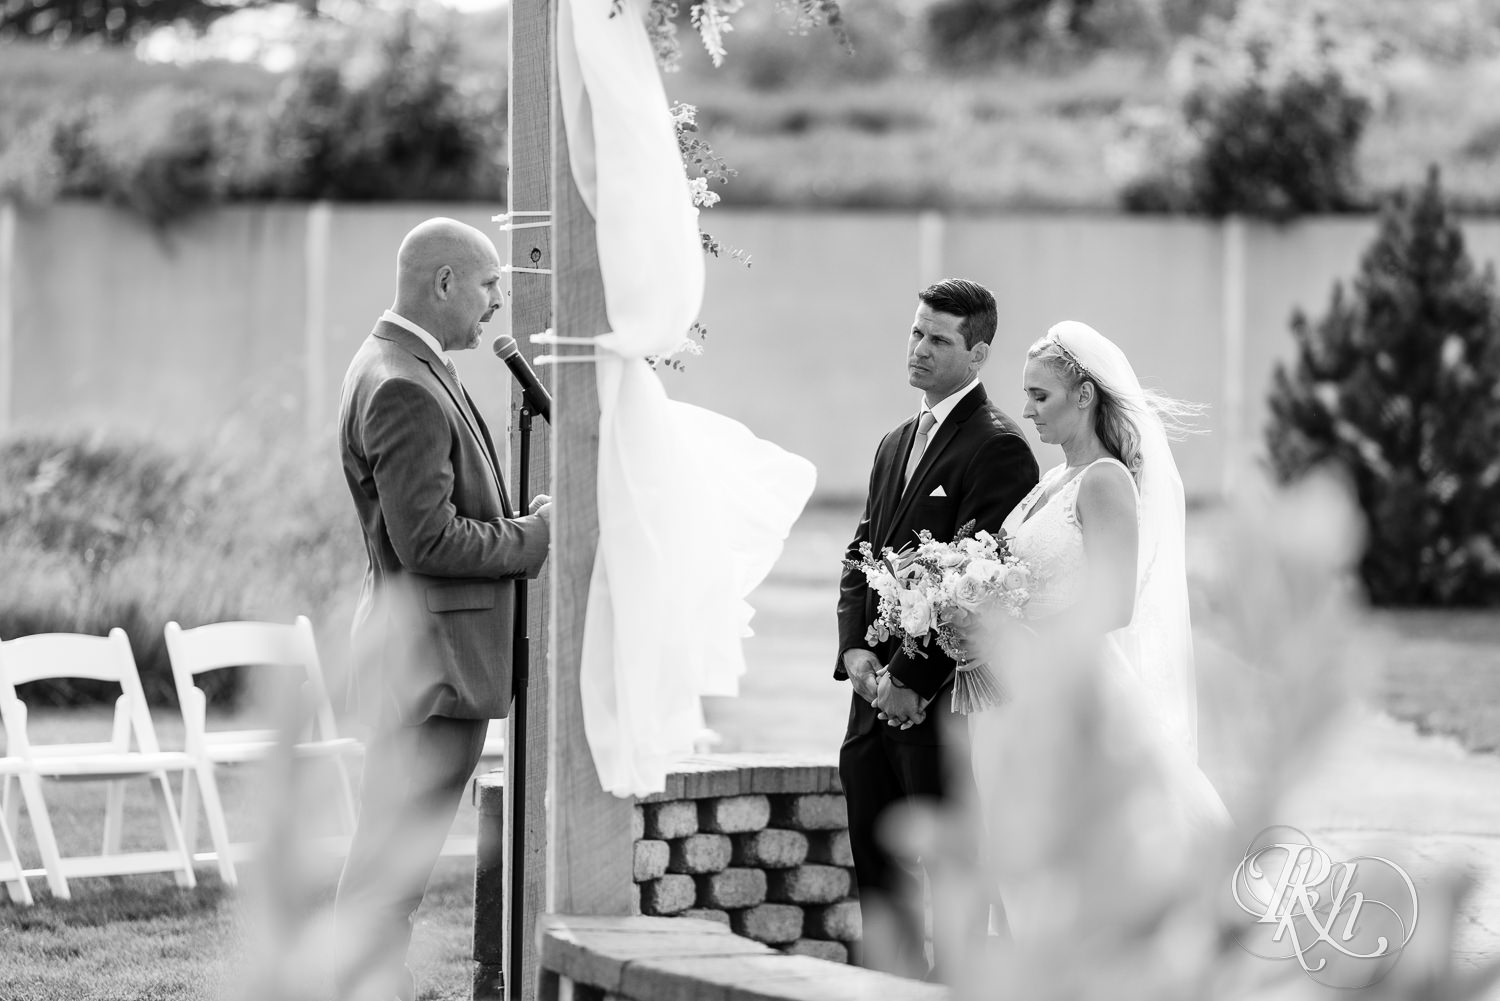 Bride and groom at the alter during wedding ceremony at The Outpost Center in Chaska, Minnesota.